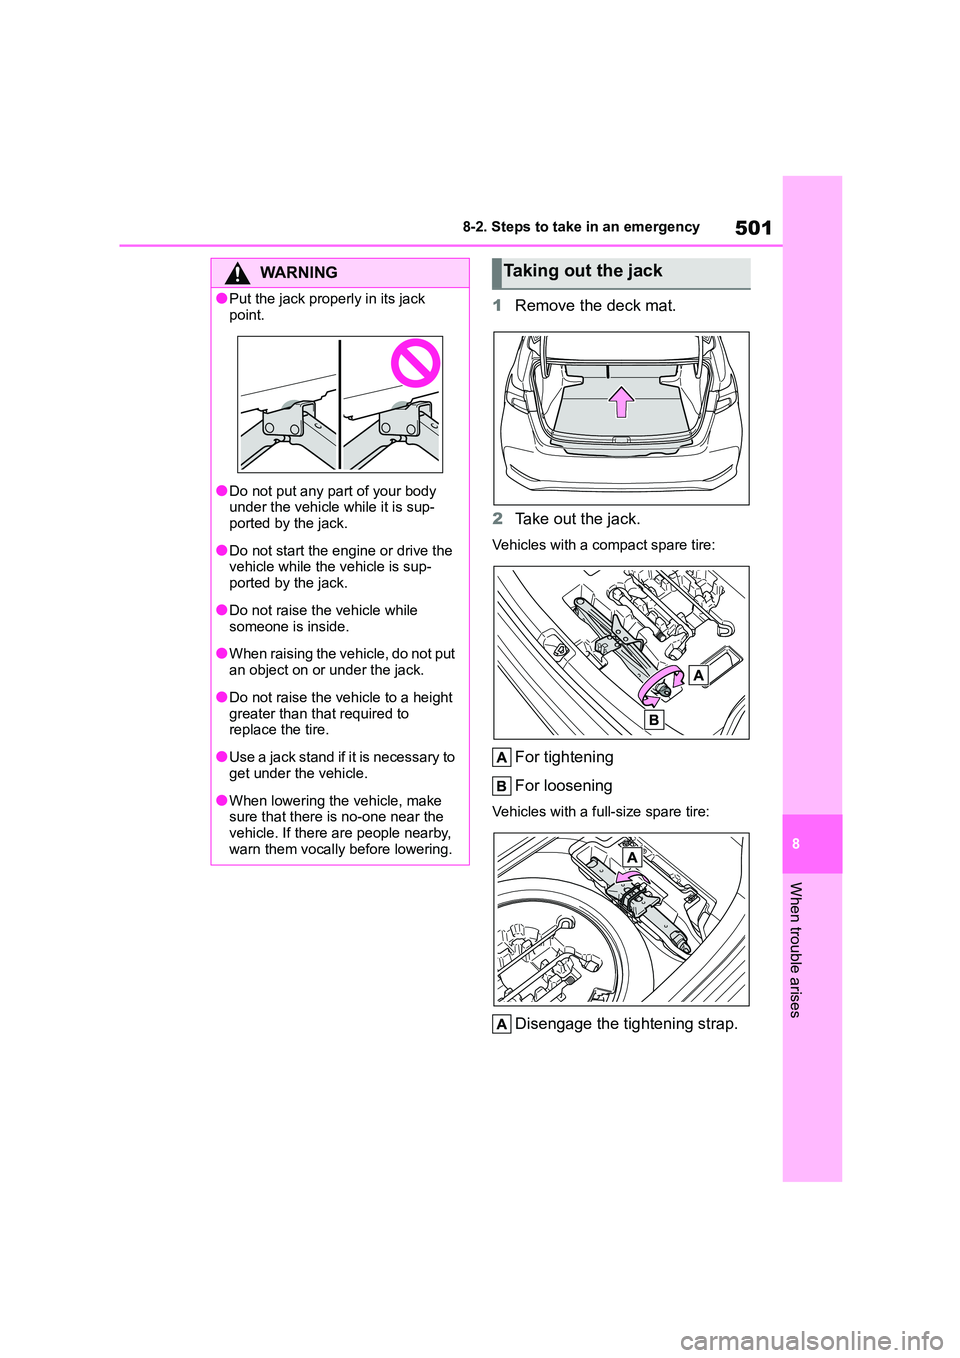 TOYOTA COROLLA 2022  Owners Manual (in English) 501
8 
8-2. Steps to take in an emergency
When trouble arises
1 Remove the deck mat. 
2 Take out the jack.
Vehicles with a compact spare tire:
For tightening 
For loosening
Vehicles with a full-size s